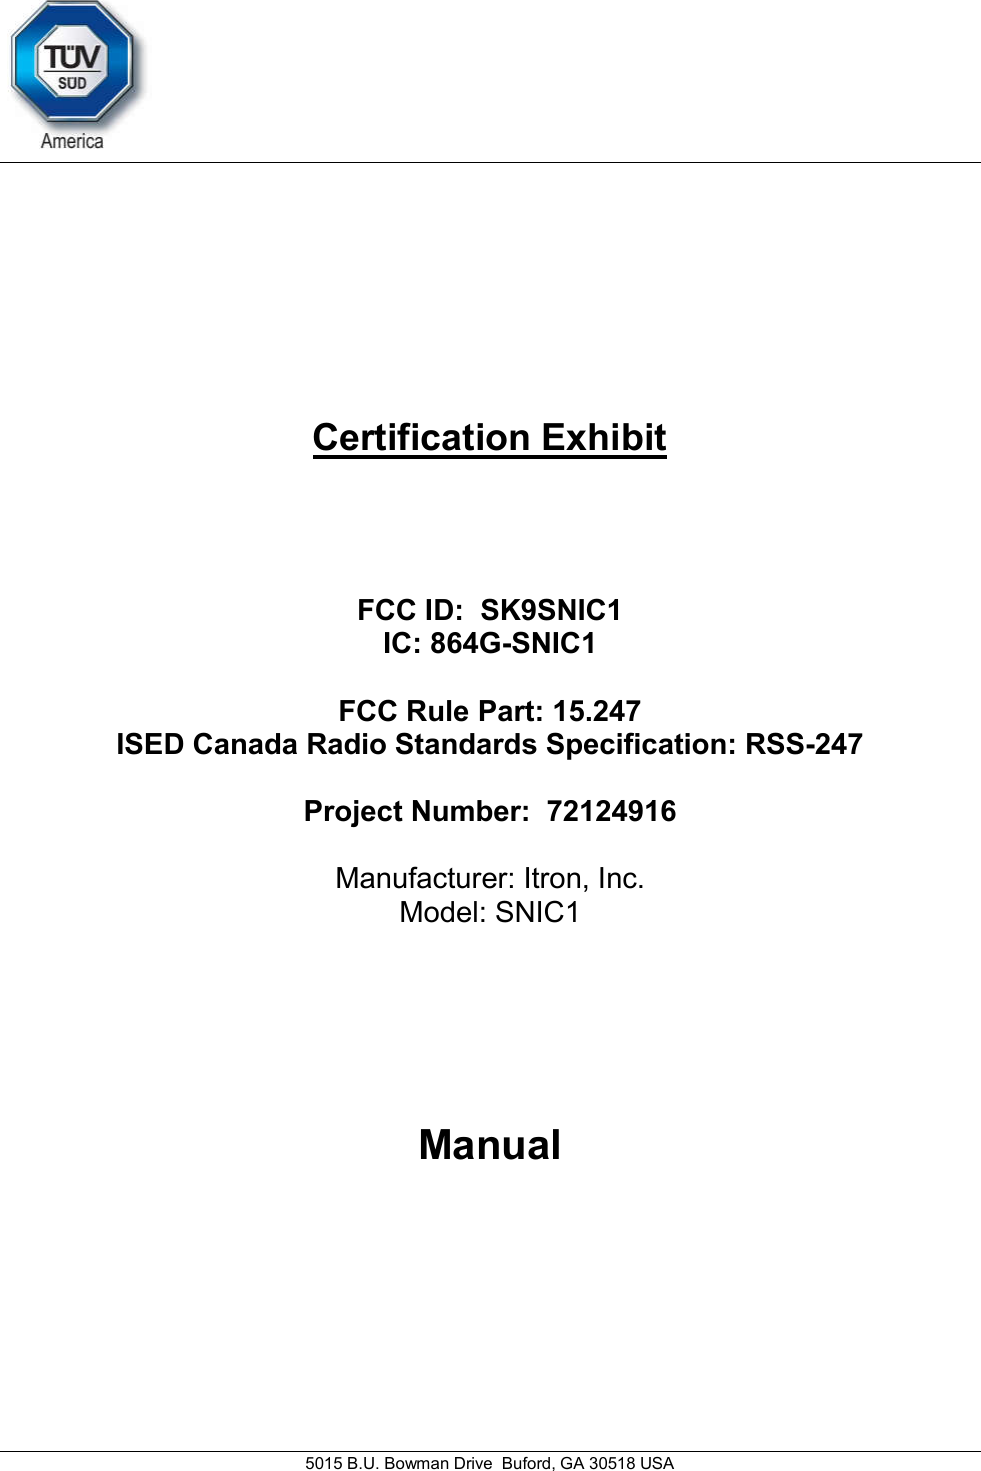     5015 B.U. Bowman Drive  Buford, GA 30518 USA   Certification Exhibit     FCC ID:  SK9SNIC1 IC: 864G-SNIC1  FCC Rule Part: 15.247 ISED Canada Radio Standards Specification: RSS-247  Project Number:  72124916   Manufacturer: Itron, Inc. Model: SNIC1     Manual   